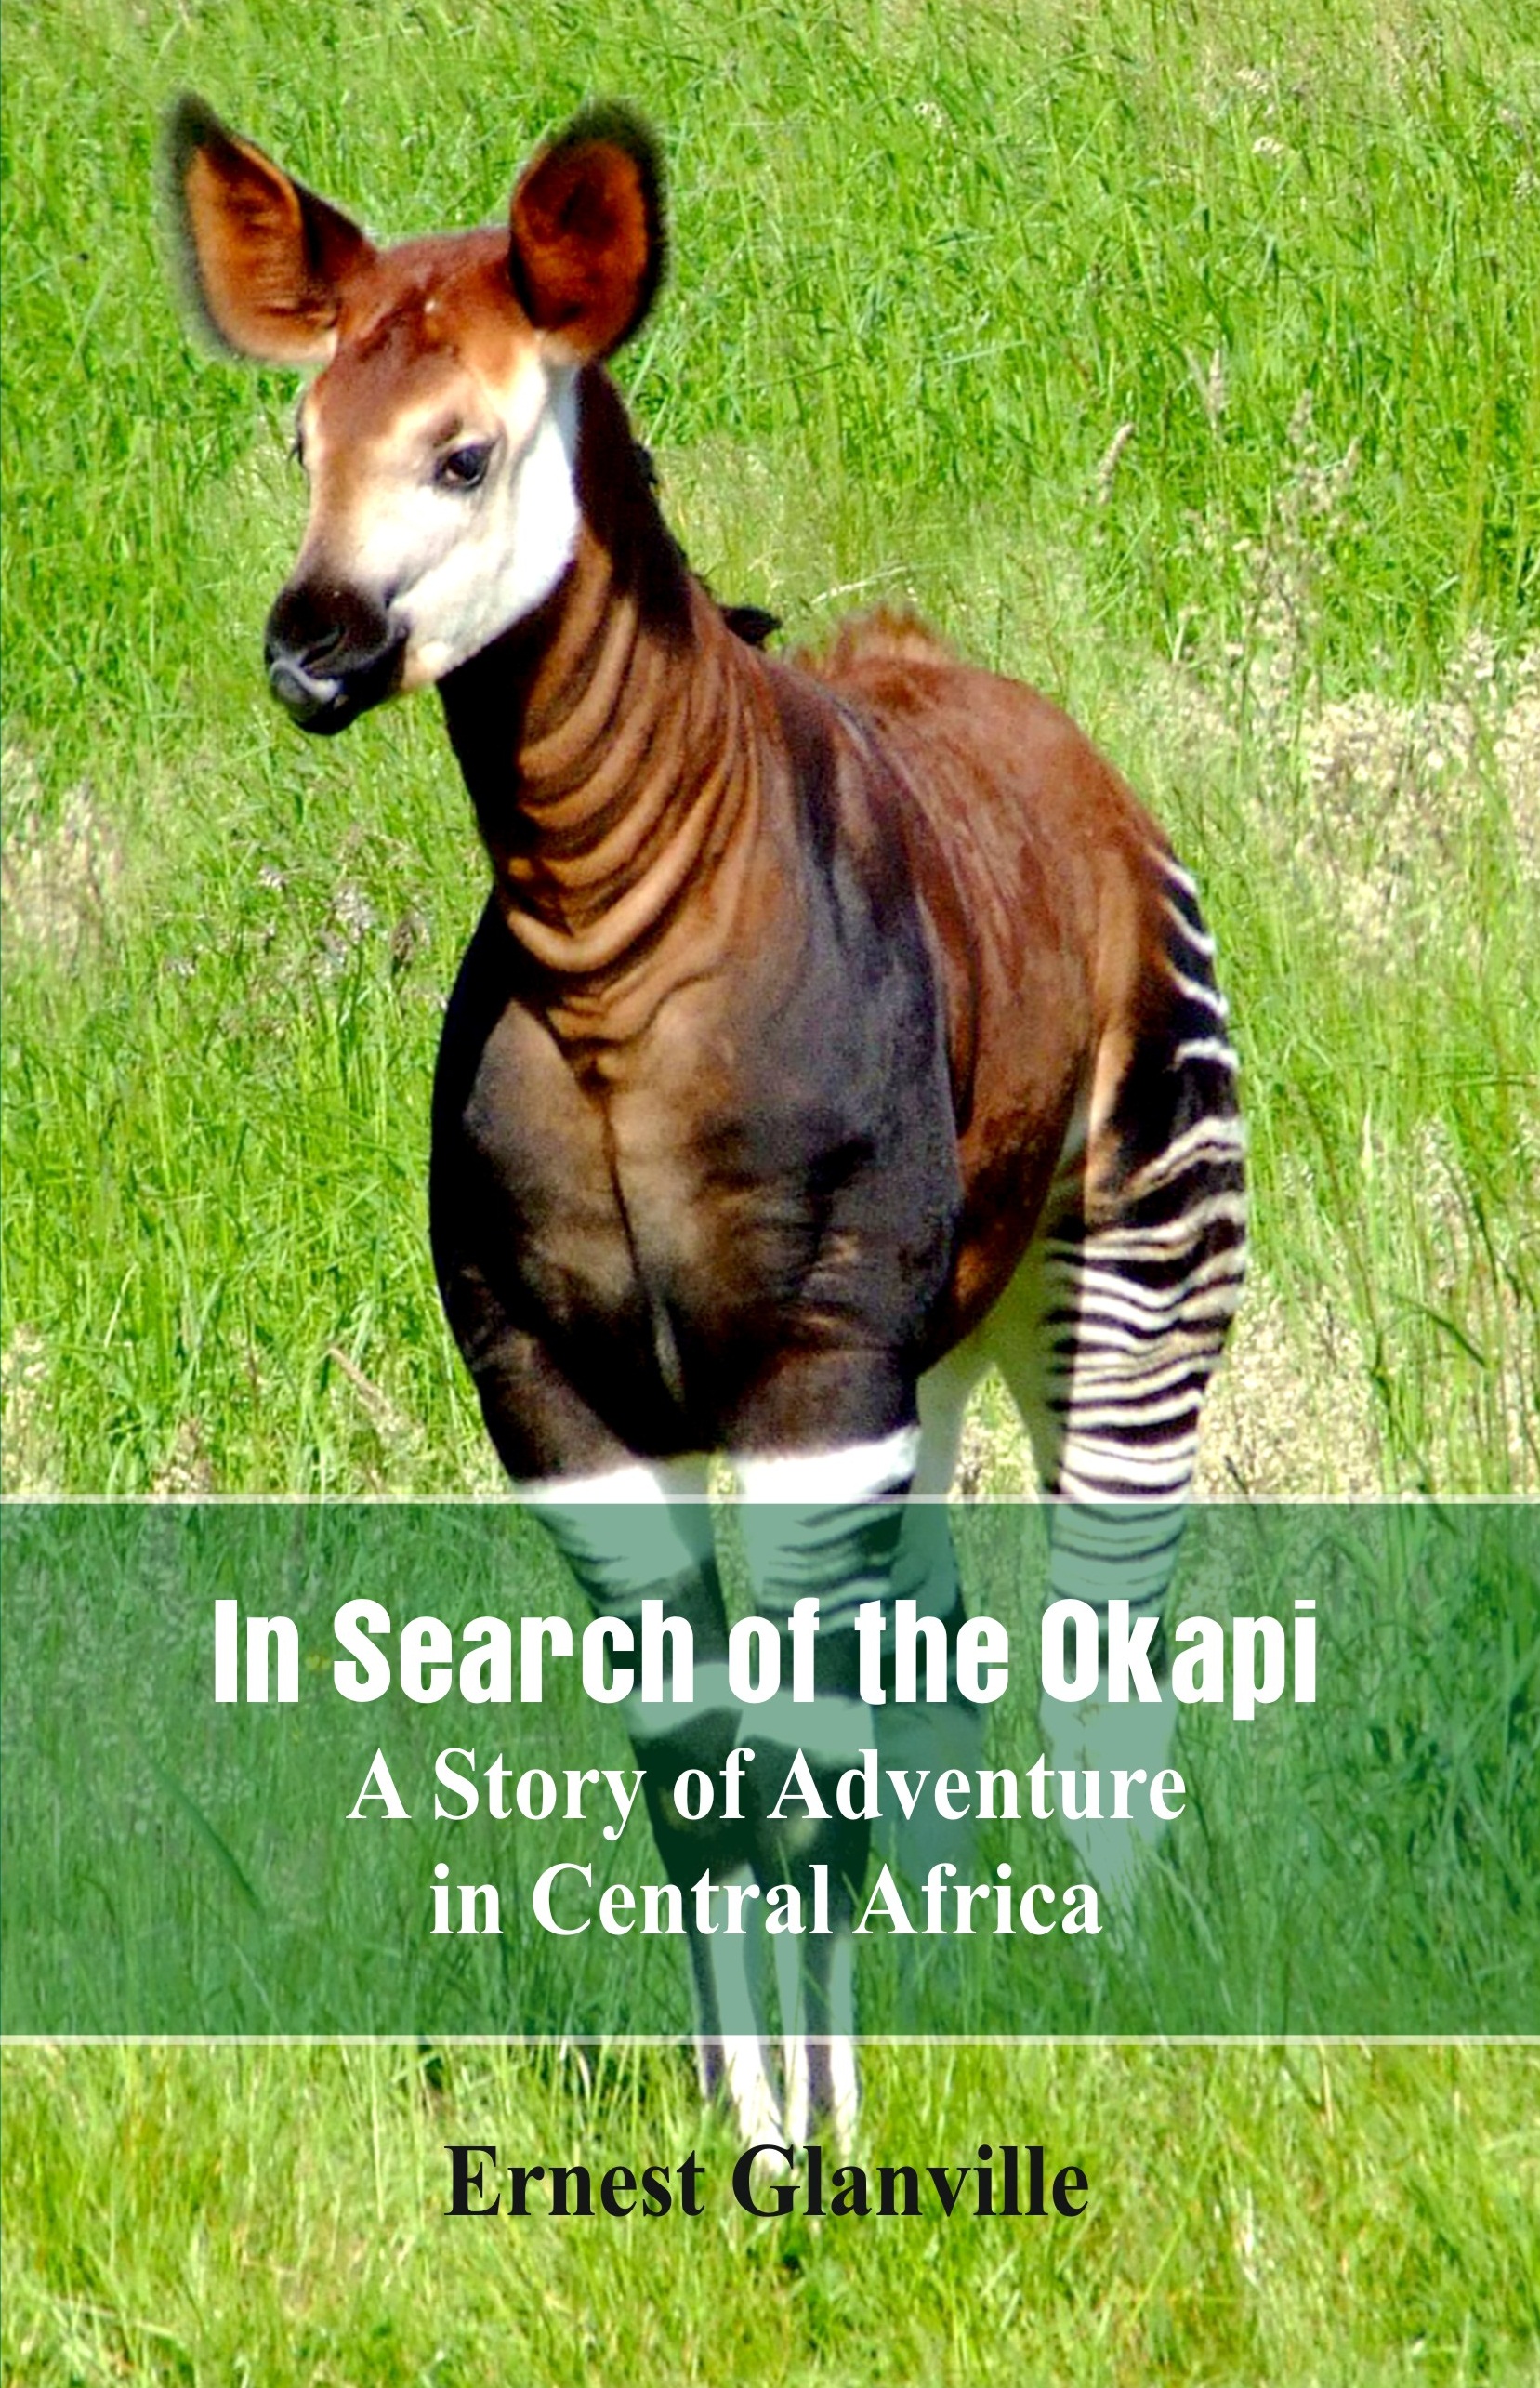 In Search of the Okapi A Story of Adventure in Central Africa